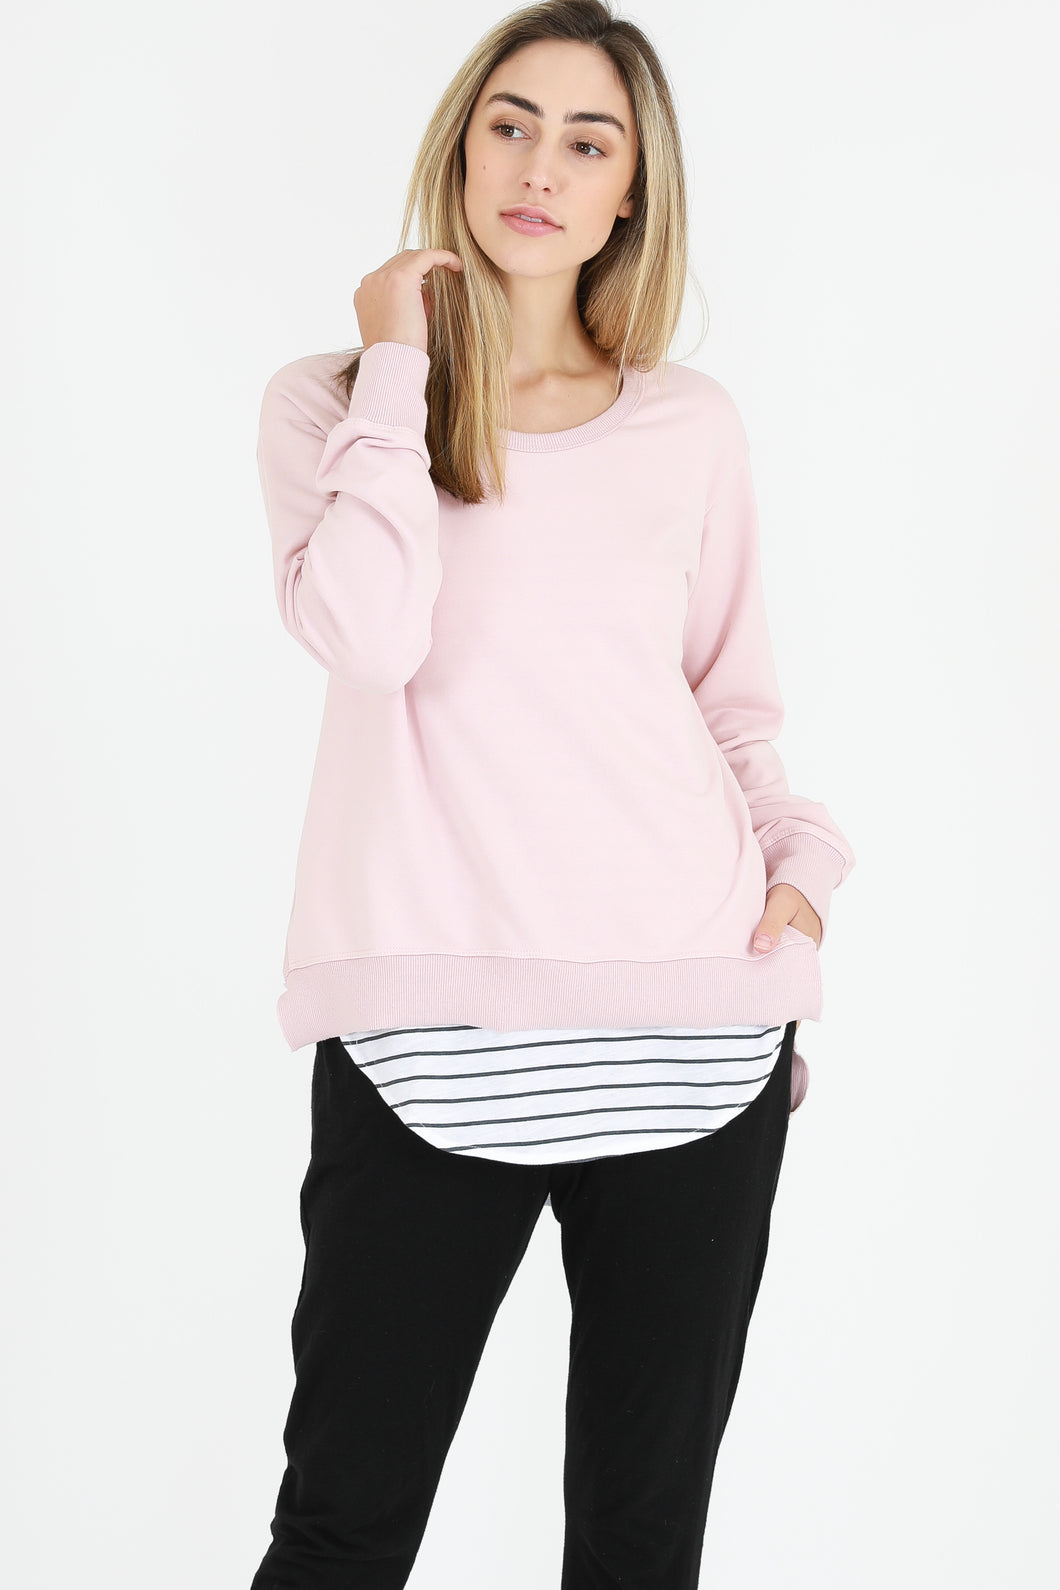 3rd Story Stockist - Basic State 3rd Story Ulverstone Jumper Ulverstone Sweater - Pink Marshmallow